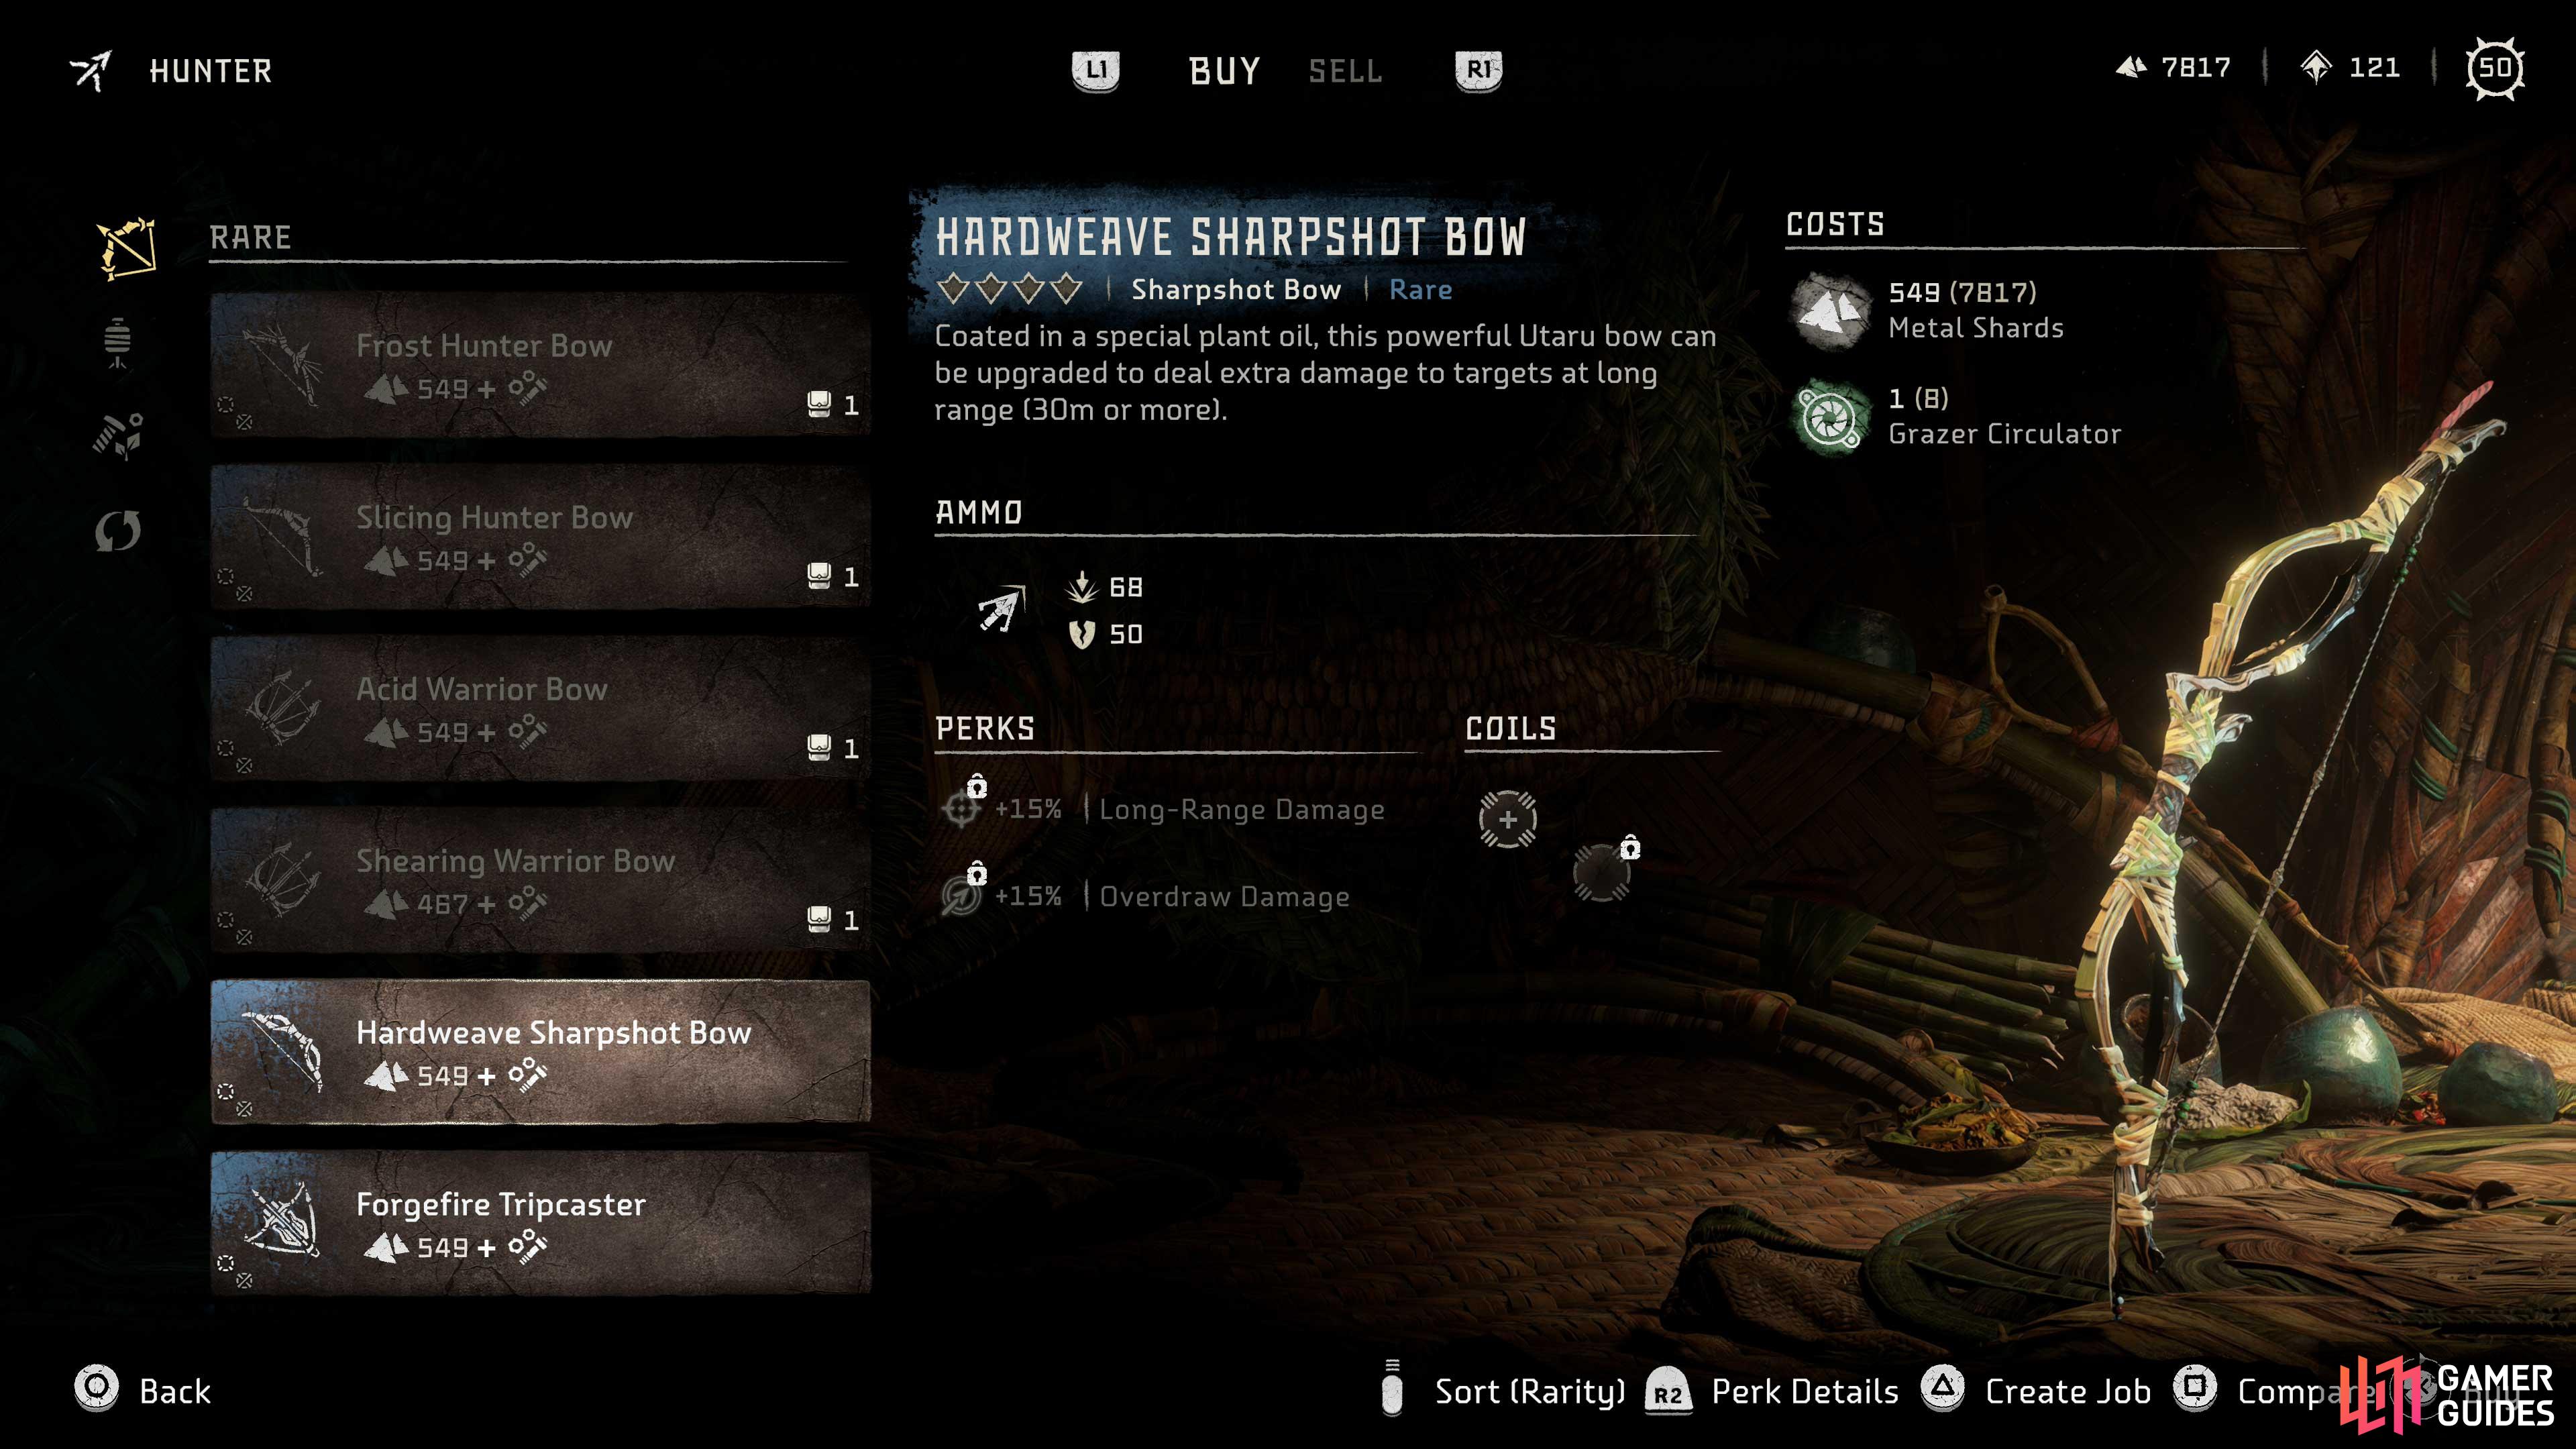 You can buy the Hardweave Sharpshot Bow from the Hunter in Plainsong.